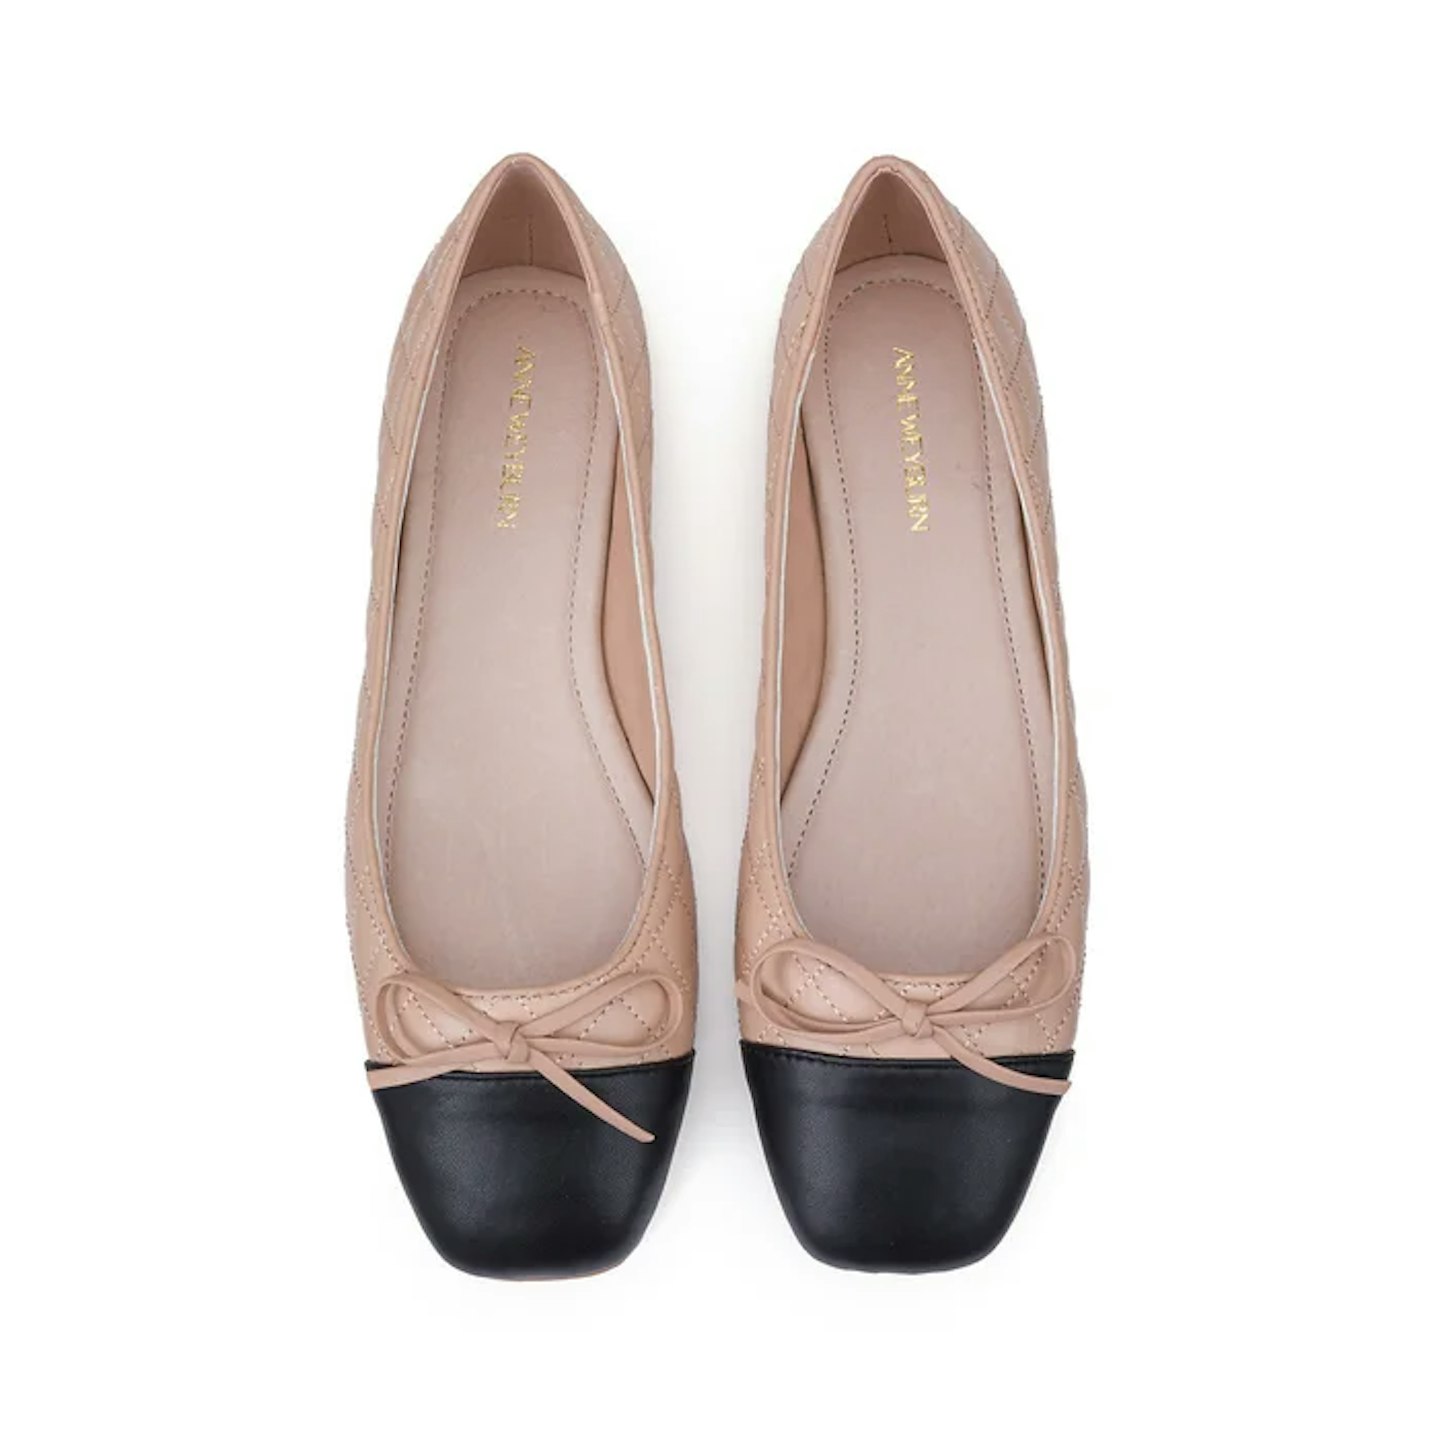 Fashion fans go wild for Chanel pump dupes from M&S - they're over £700  cheaper and look almost identical